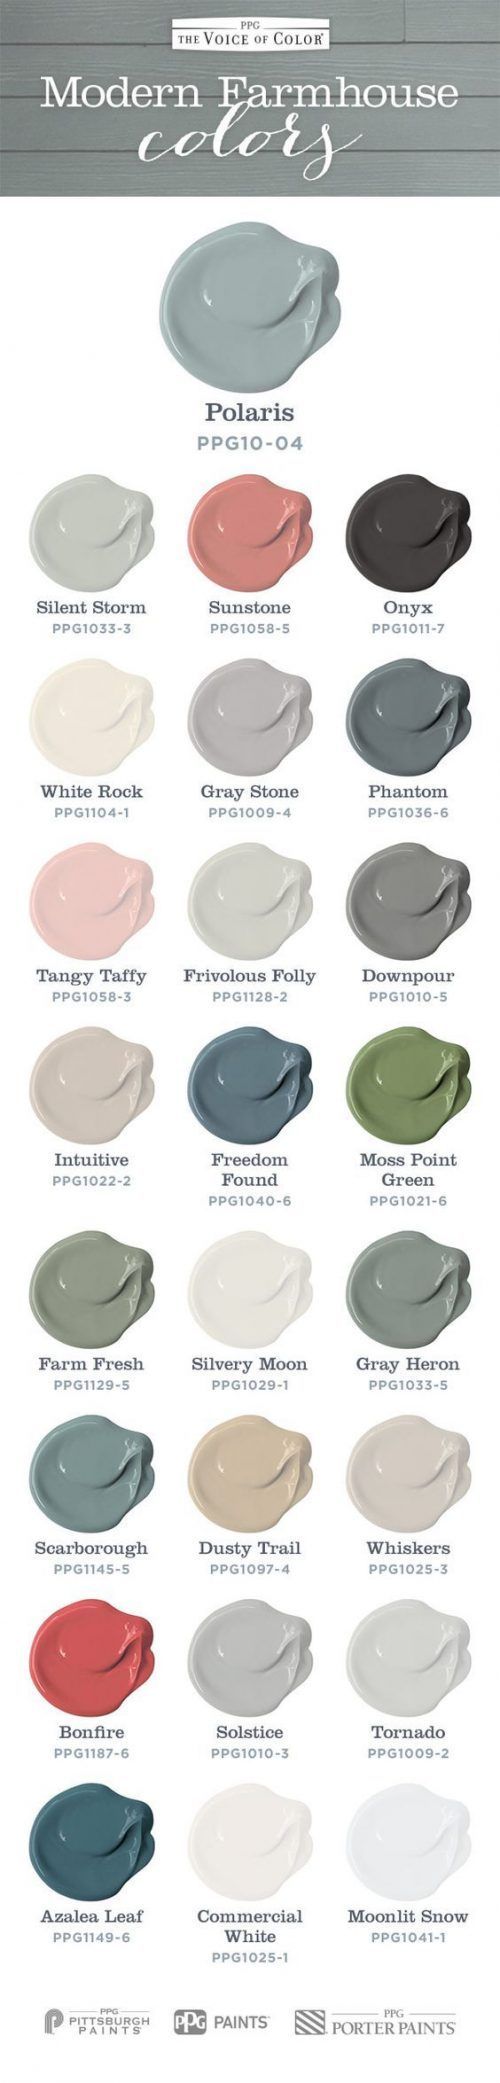 When creating your humble abode, you need the right Farmhouse Paint Colors! Take a look at this entire list of calm paint colors